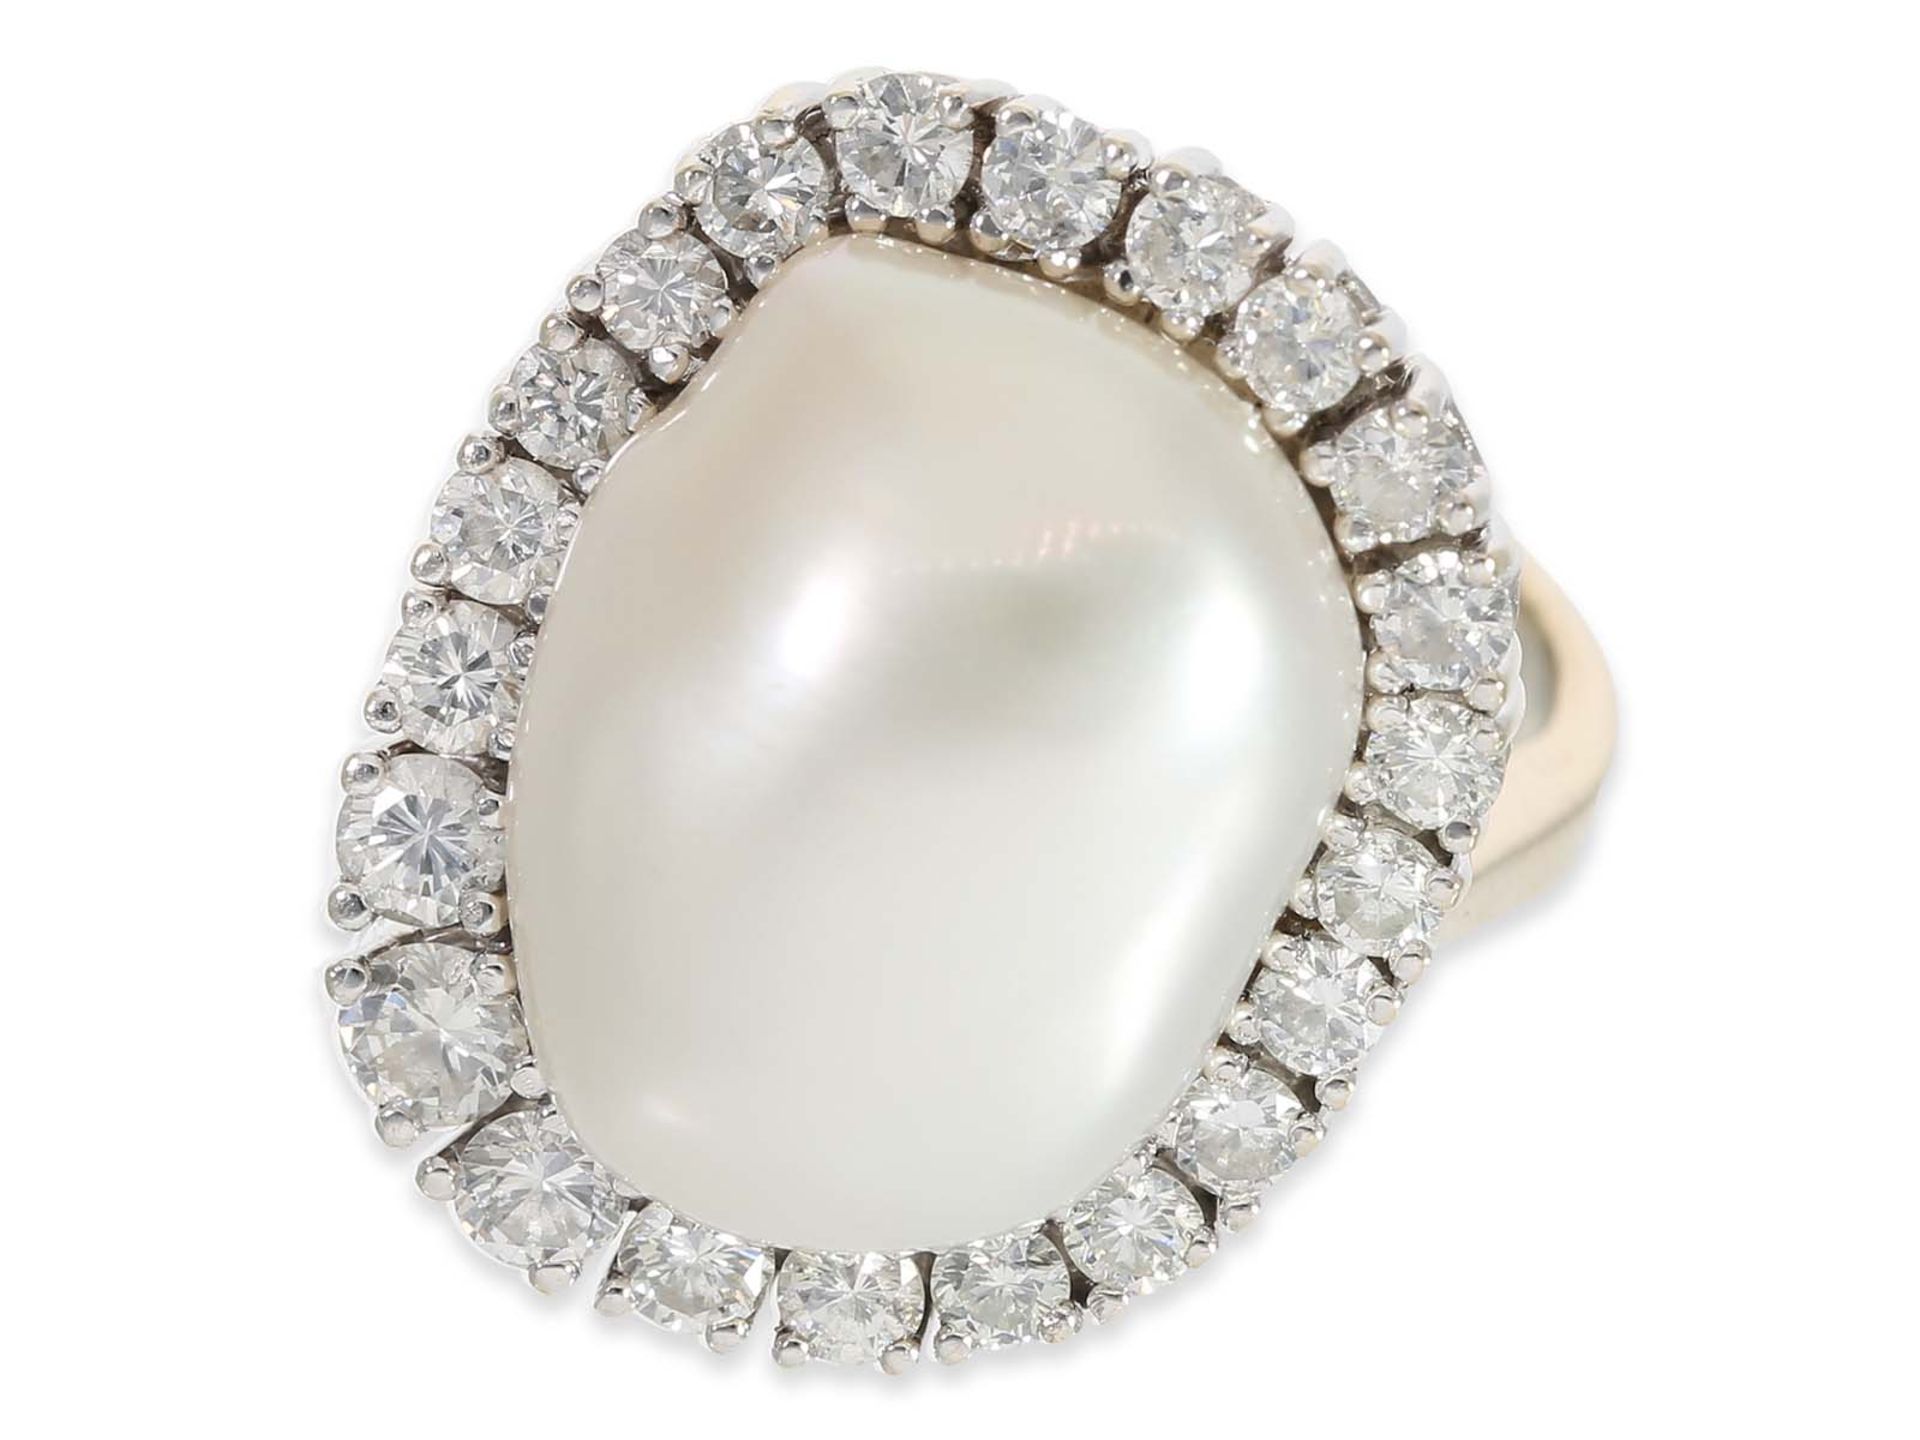 Ring: handmade diamond ring with large baroque cultured pearl, 14K gold